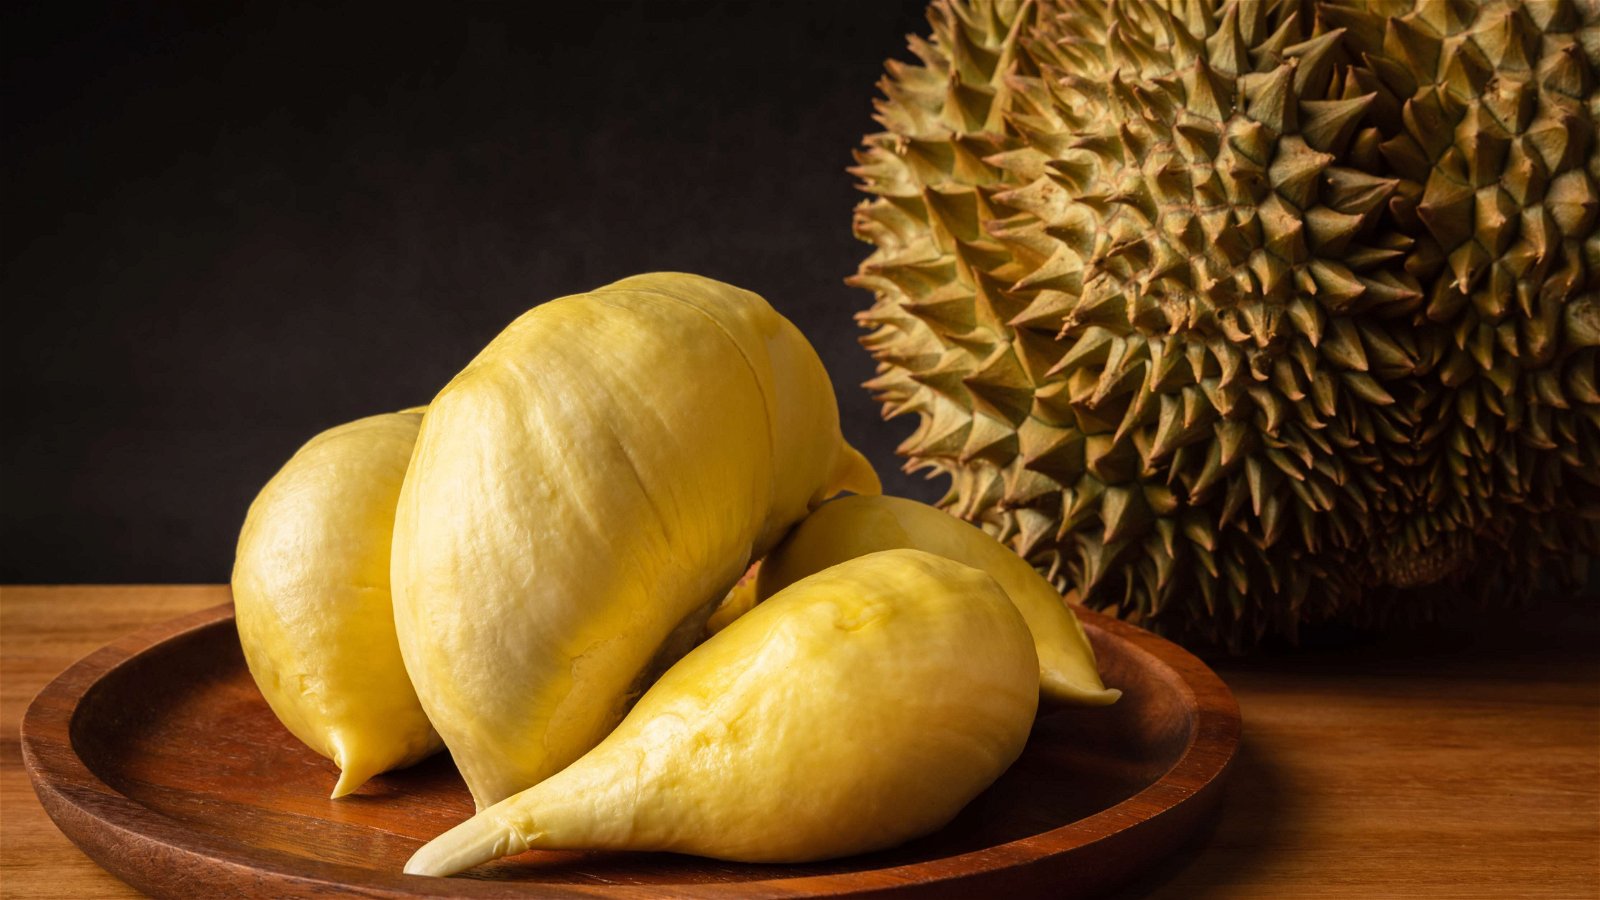 Unlock the Flavor of the&nbsp;<span style="background-color: transparent;">Tropics with Durian</span>